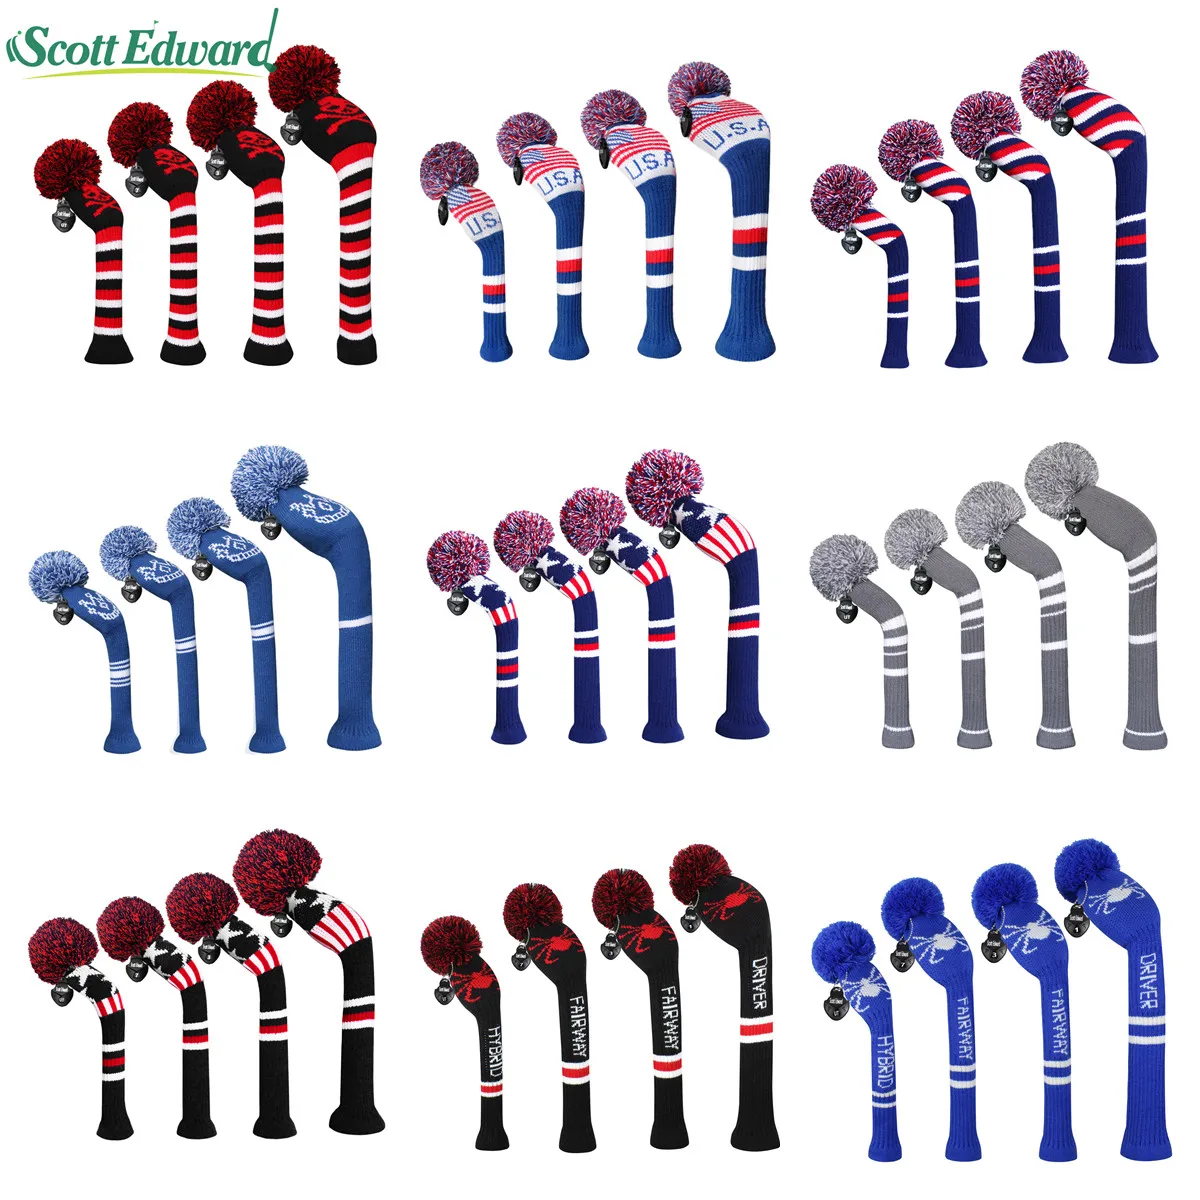 

4pcs New Golf Knitted Pom-pom Woods Headcovers,wood for Driver Fairway Hybrid,1 3 5 Golf Wood with Red/Blue/Gray